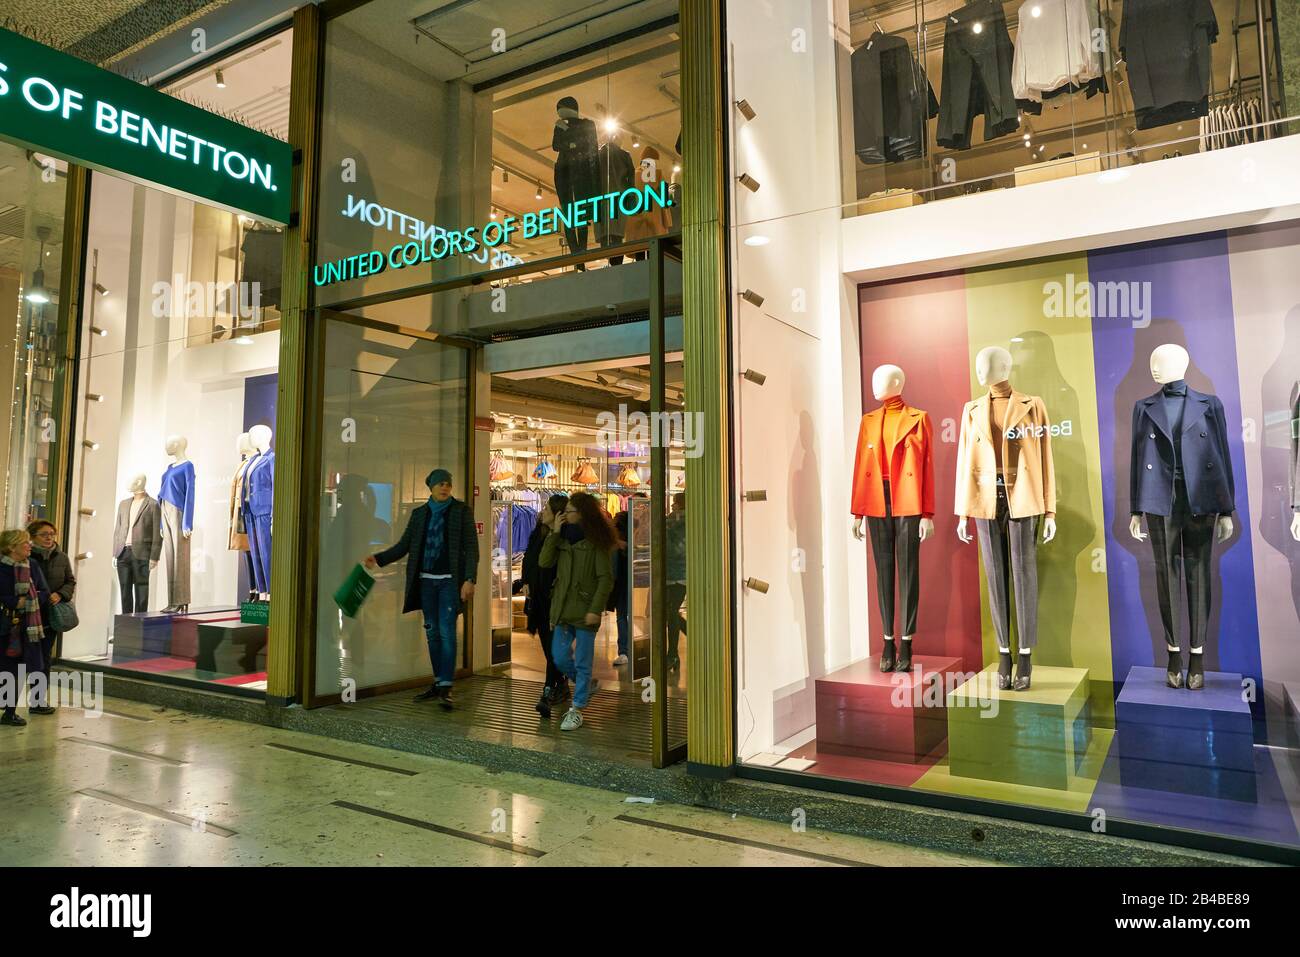 MILAN, ITALY - CIRCA NOVEMBER, 2017: entrance to United Colors of Benetton  store in Milan Stock Photo - Alamy